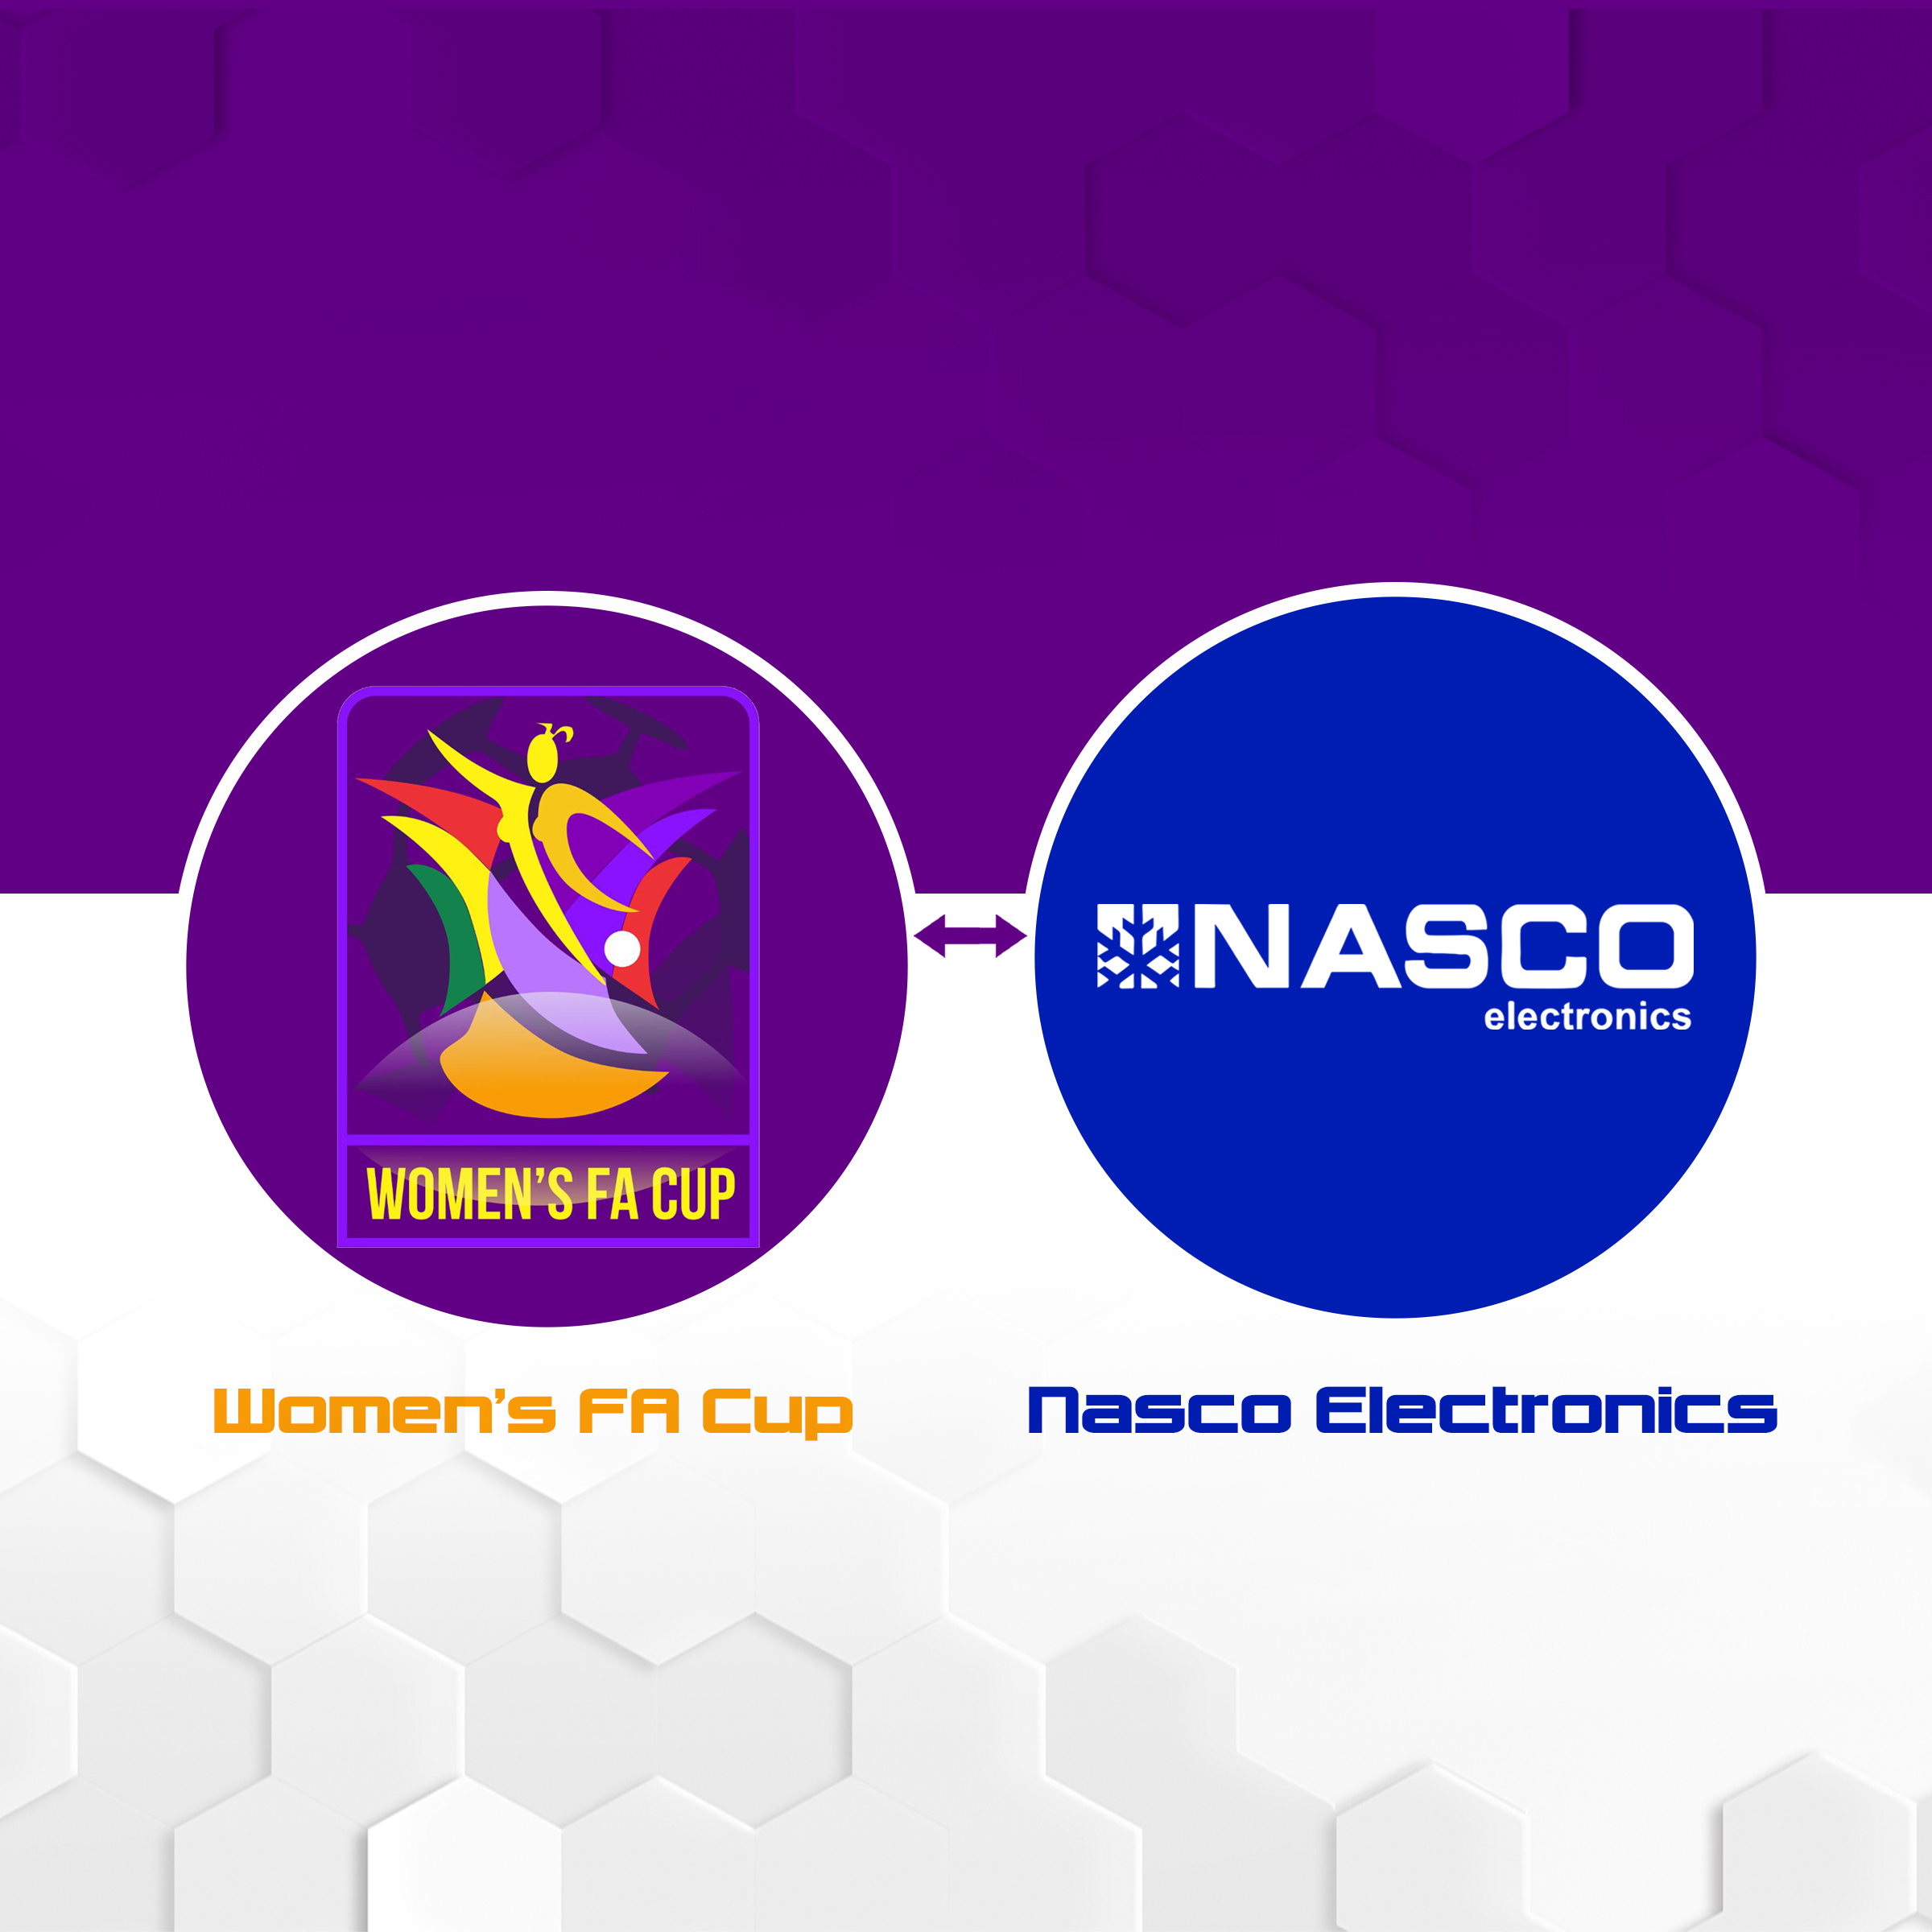 NASCO extends sponsorship package to cover Women's FA Cup competition